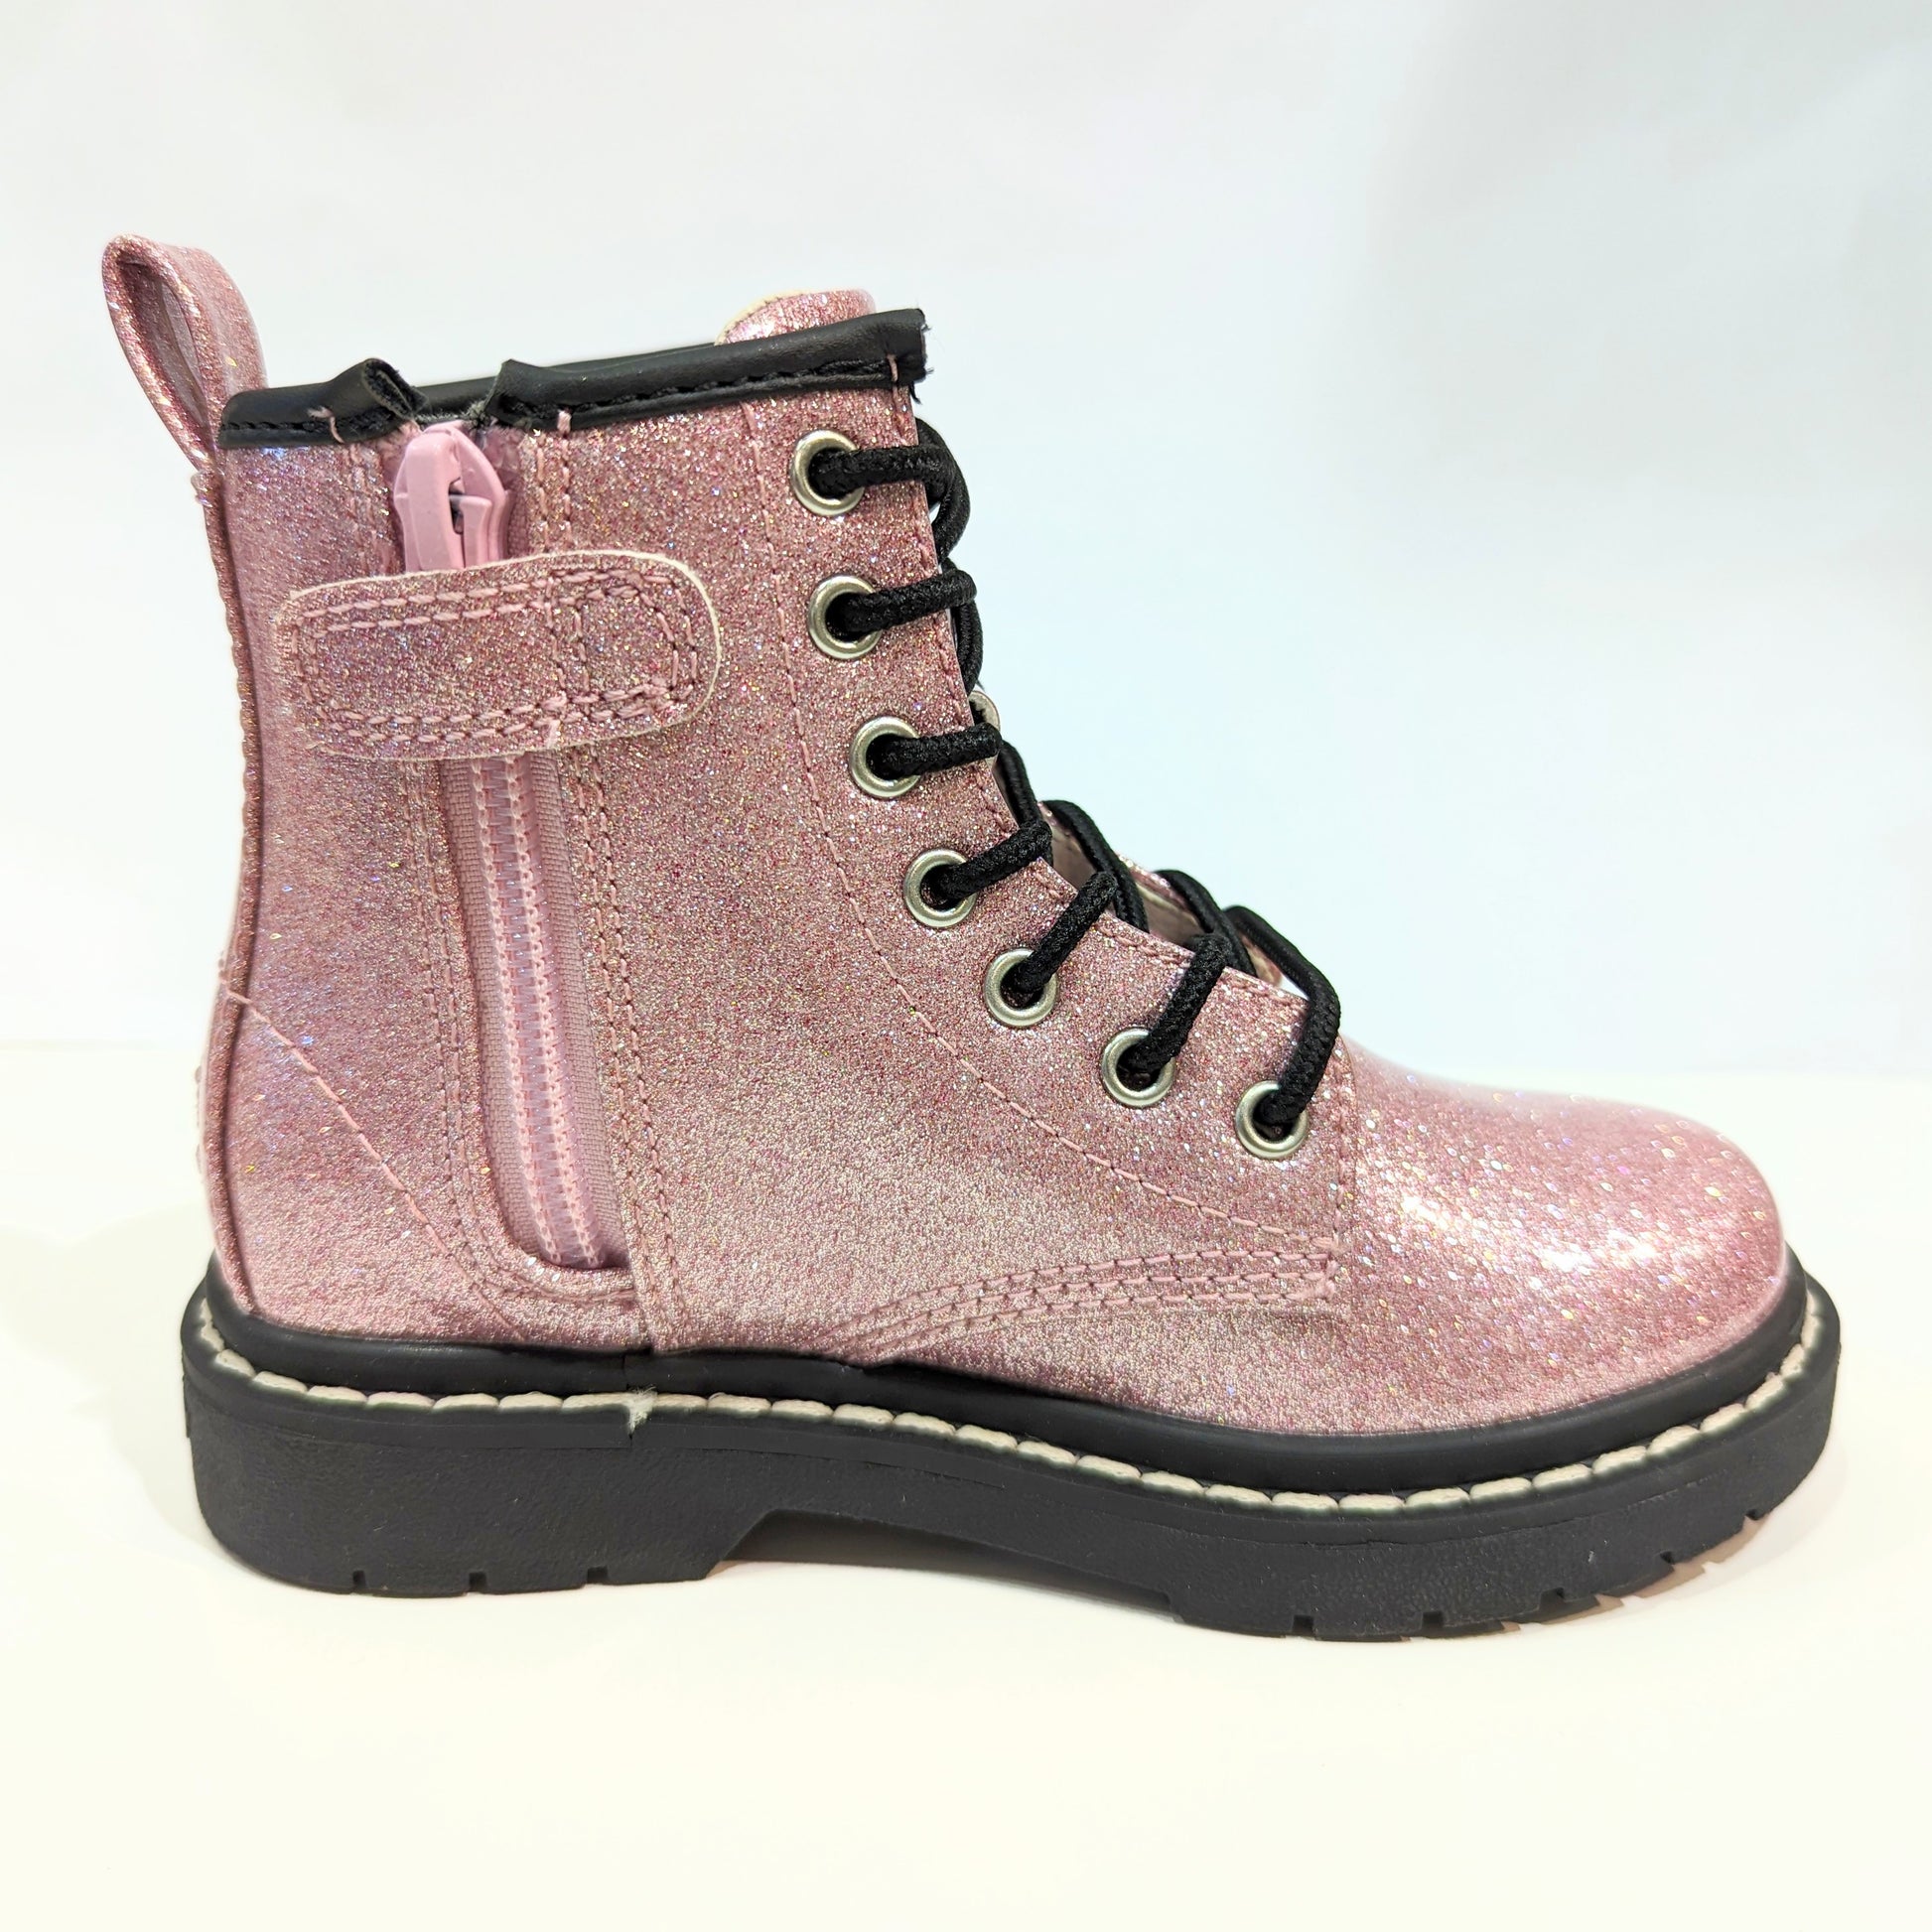 A girls boot by Lelli Kelly, style Emma, in pink glitter patent with zip and lace fastening. Right side view.